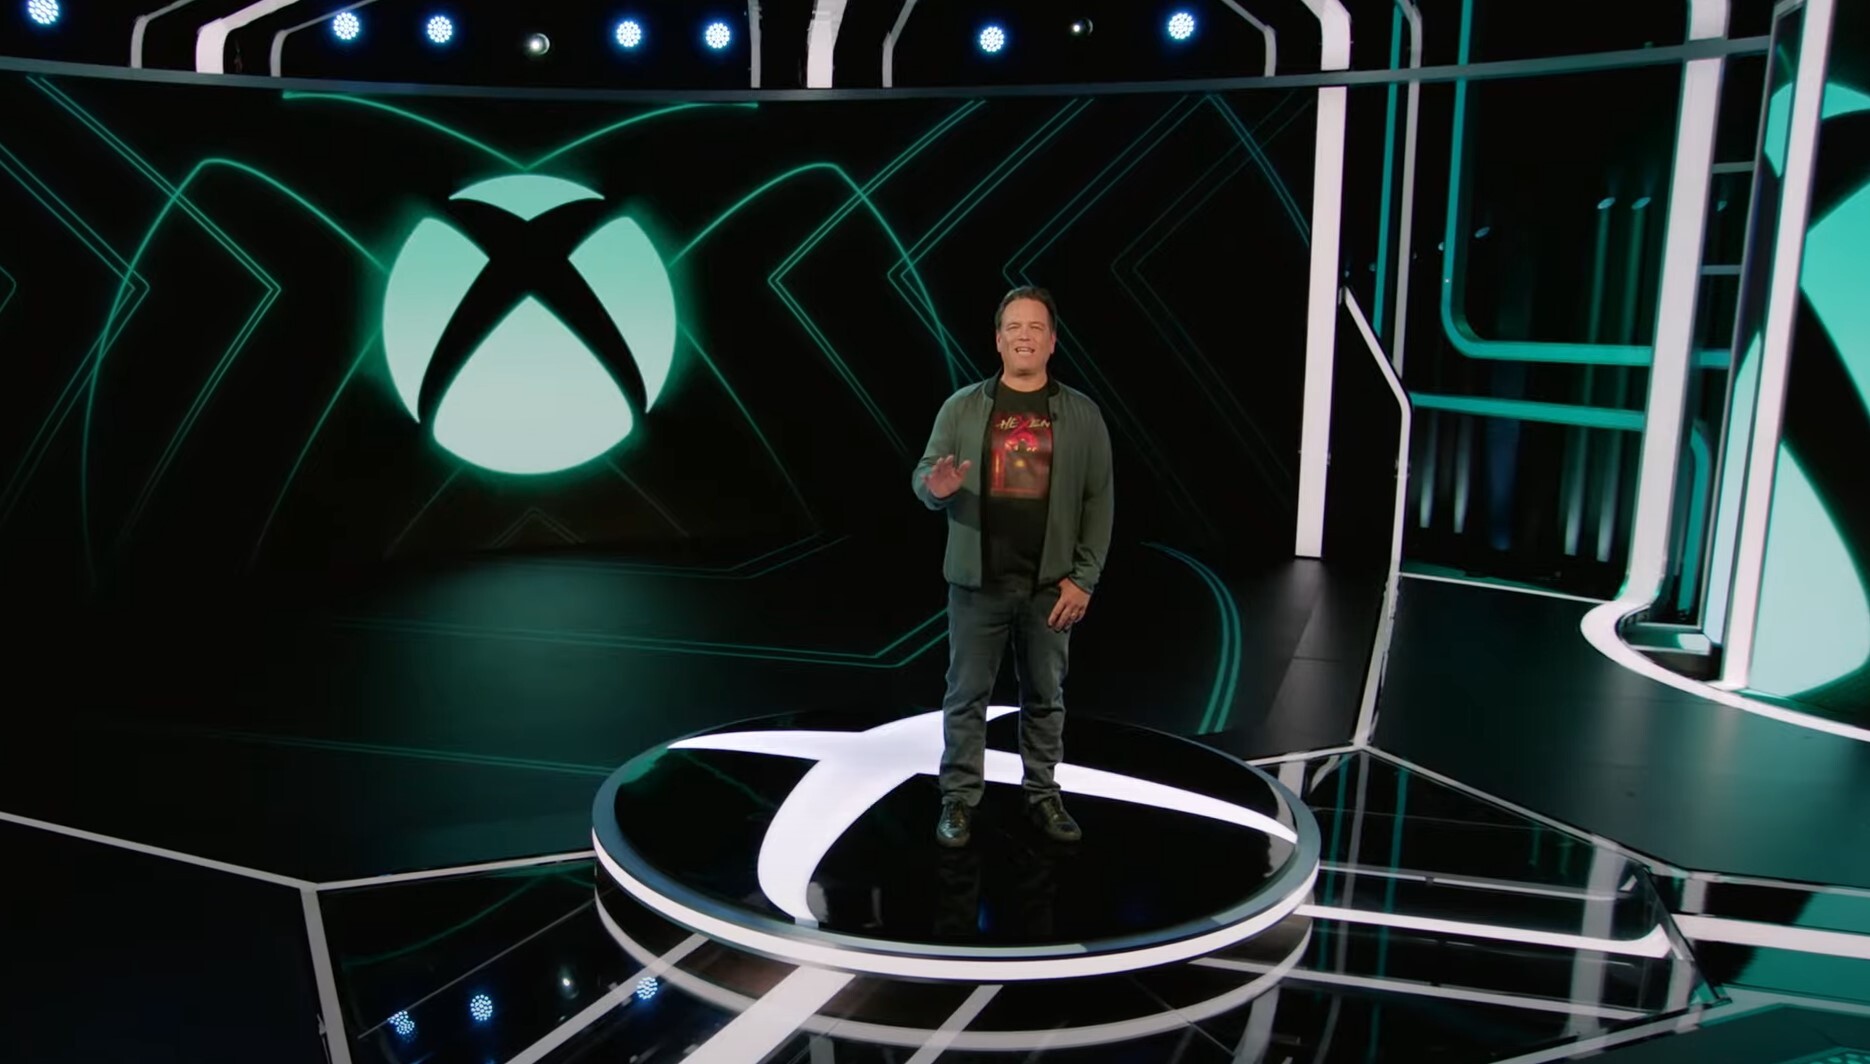 Read Phil Spencer's full Microsoft memo on the new Xbox leadership changes  - The Verge